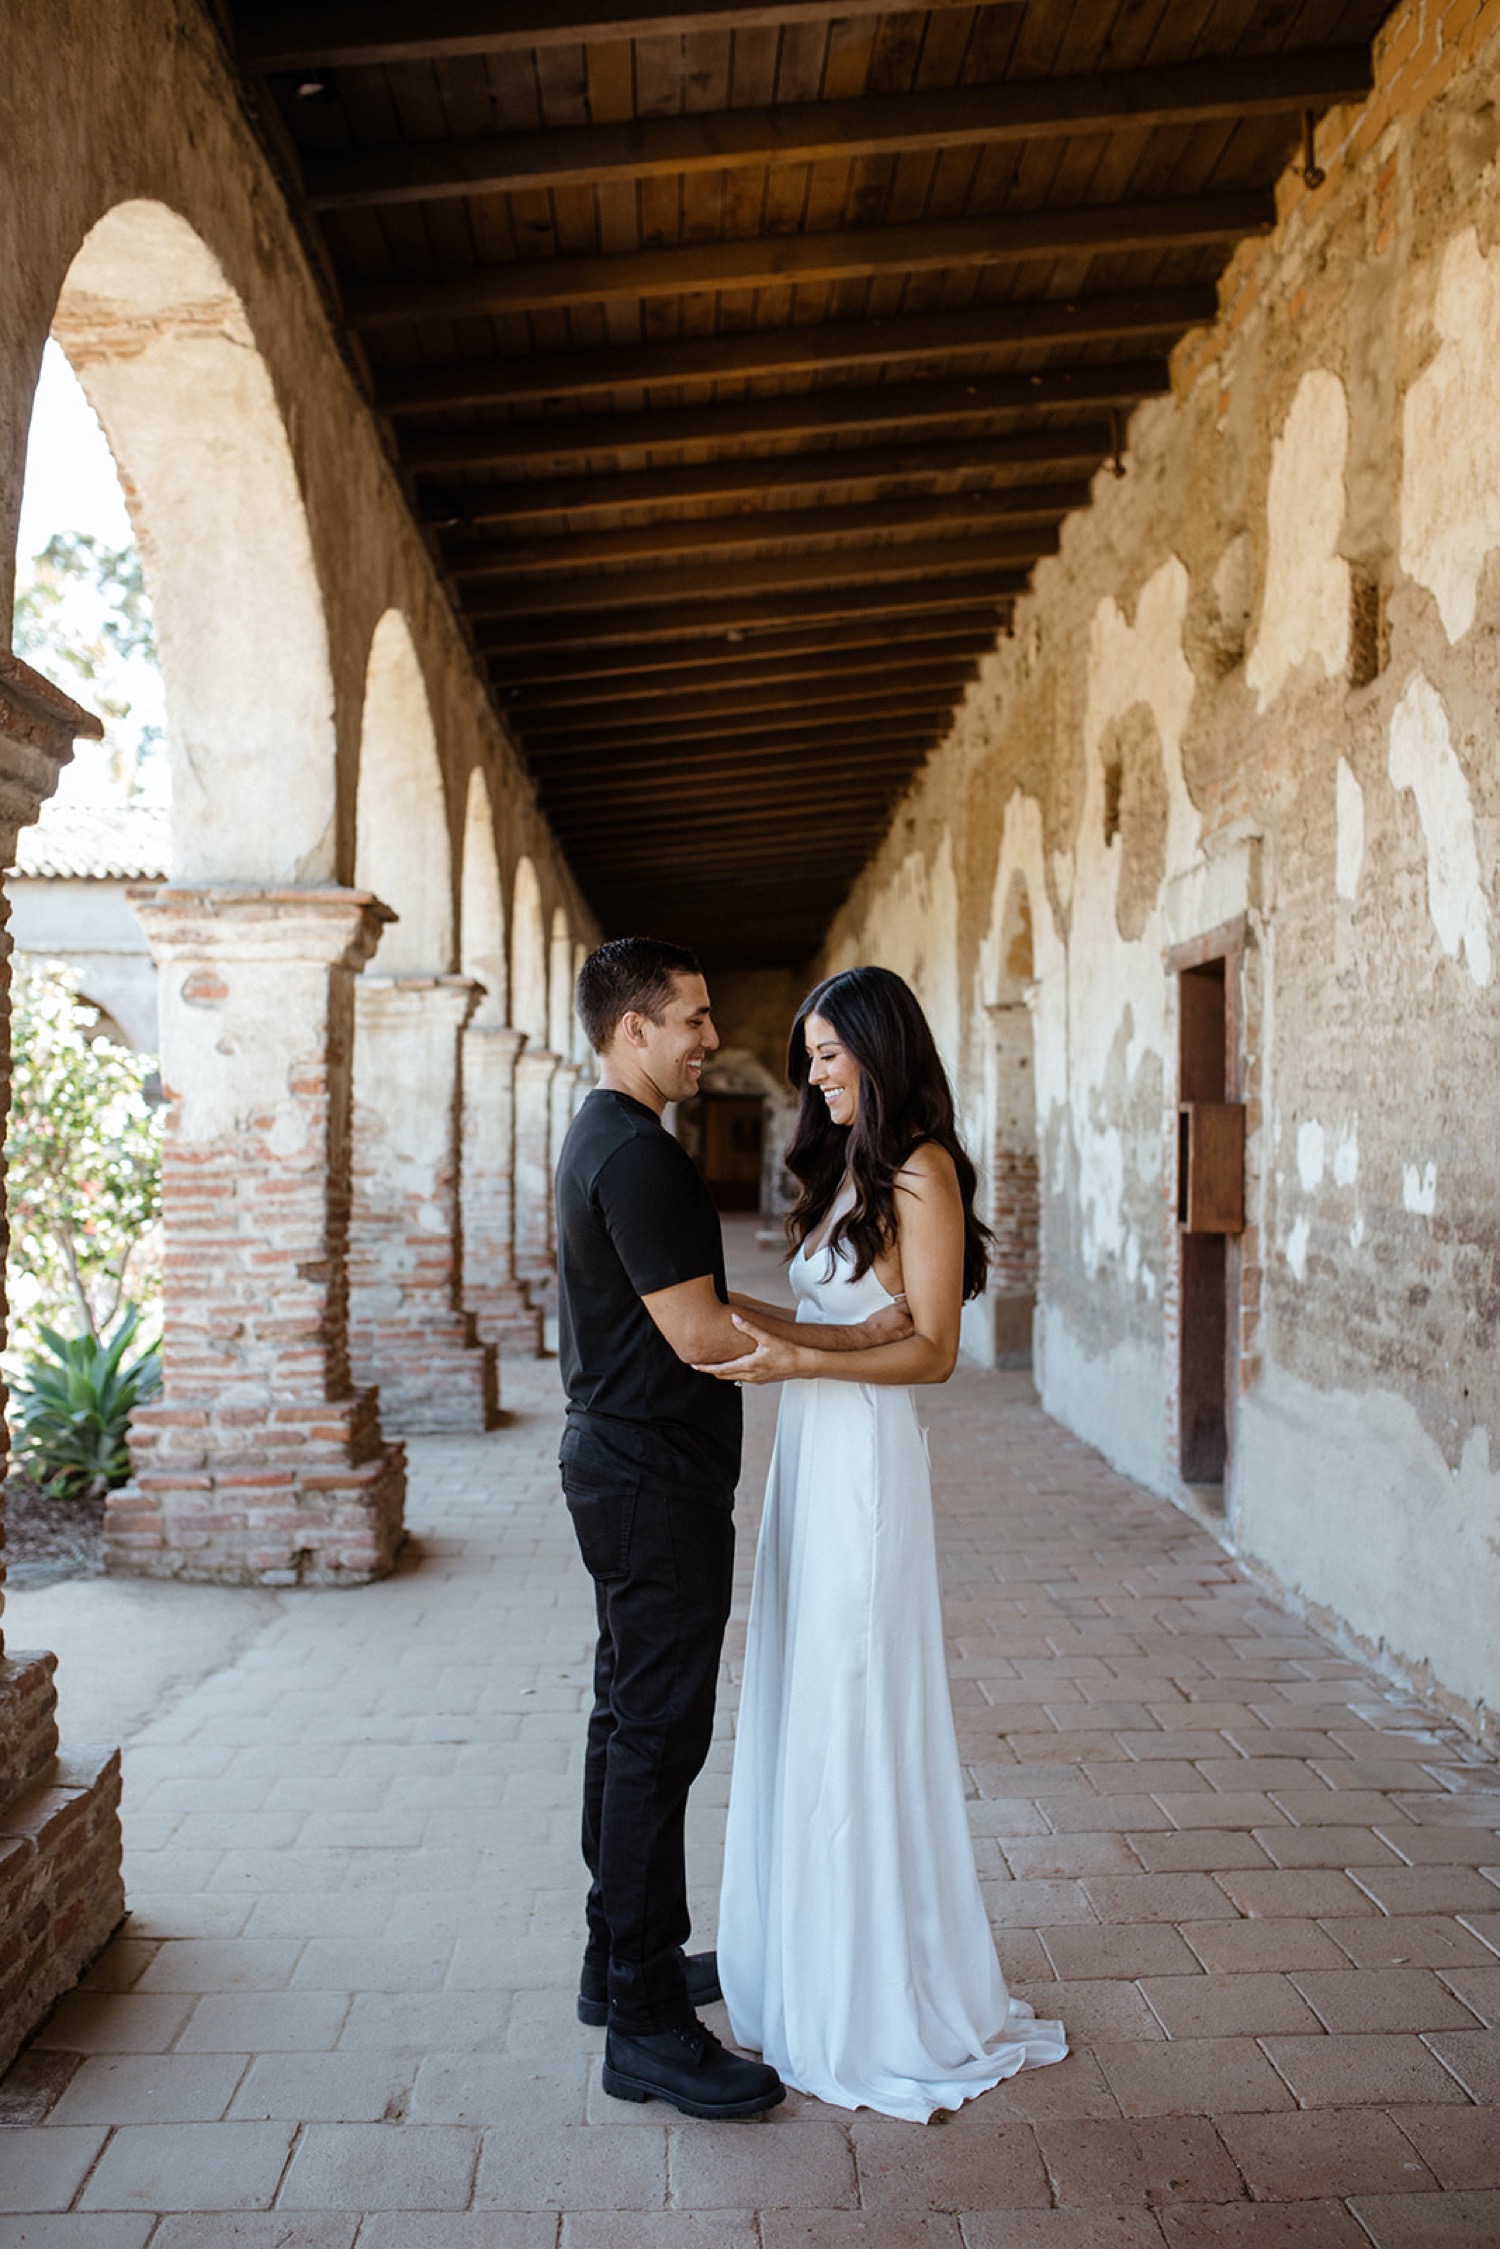 Couple embrace during their engagement session at San Juan Capistrano.